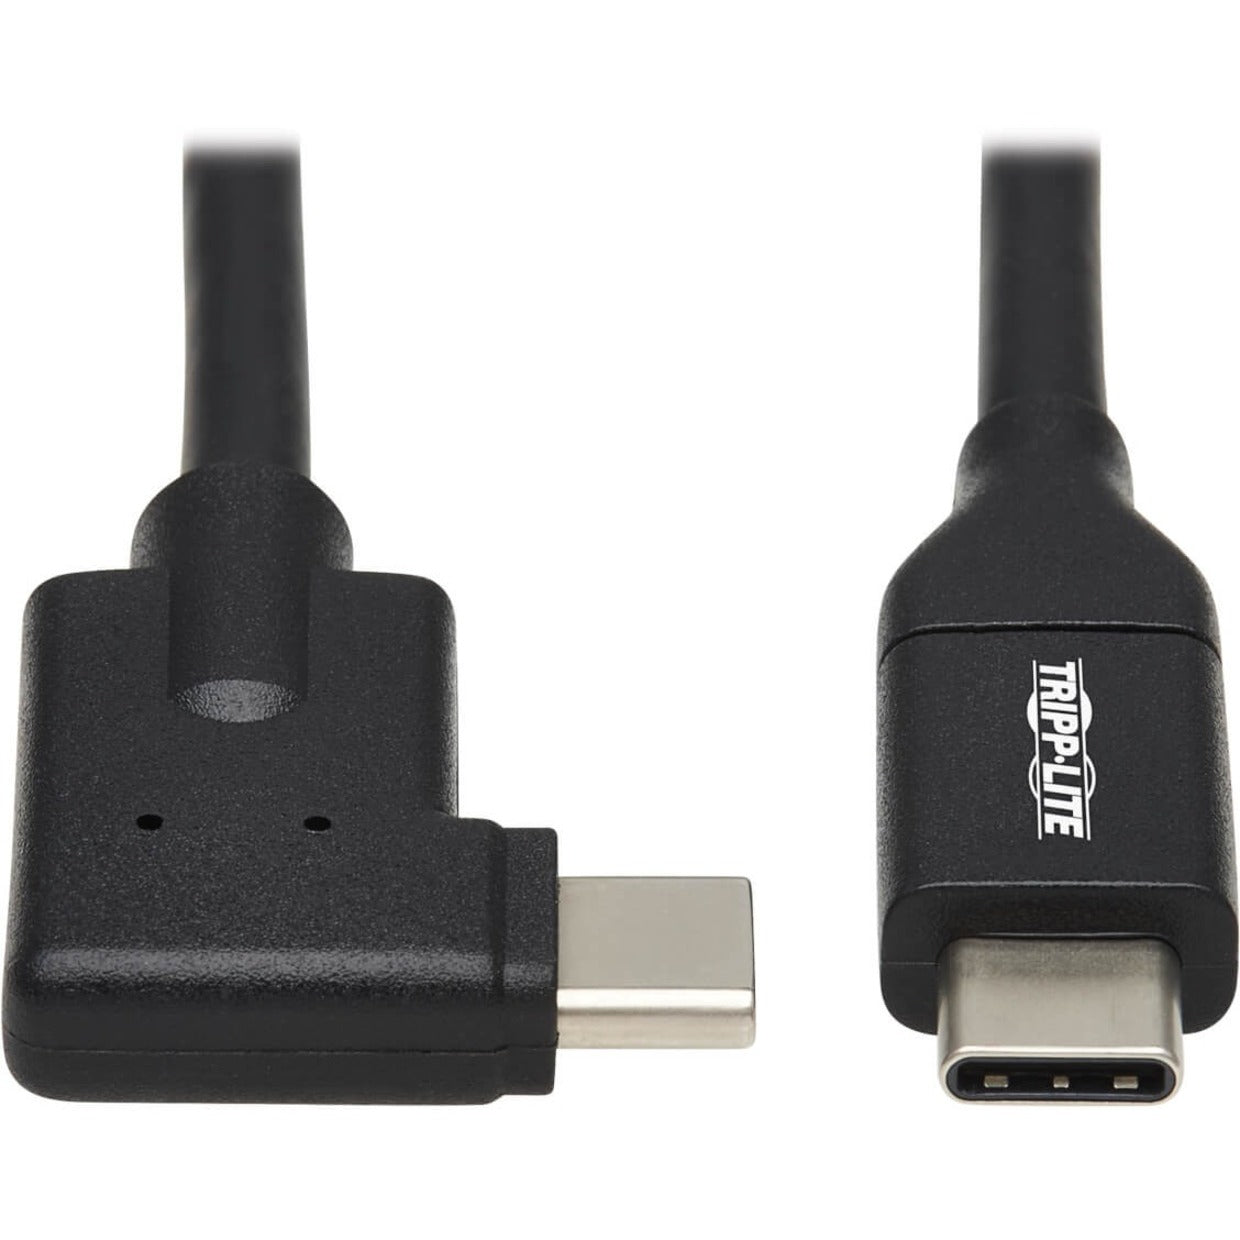 Tripp Lite U420-01M-RA USB-C to USB-C Cable, M/M, Black, 1 m (3.3 ft.), Right-Angled Connector, USB Power Delivery (USB PD), Charging